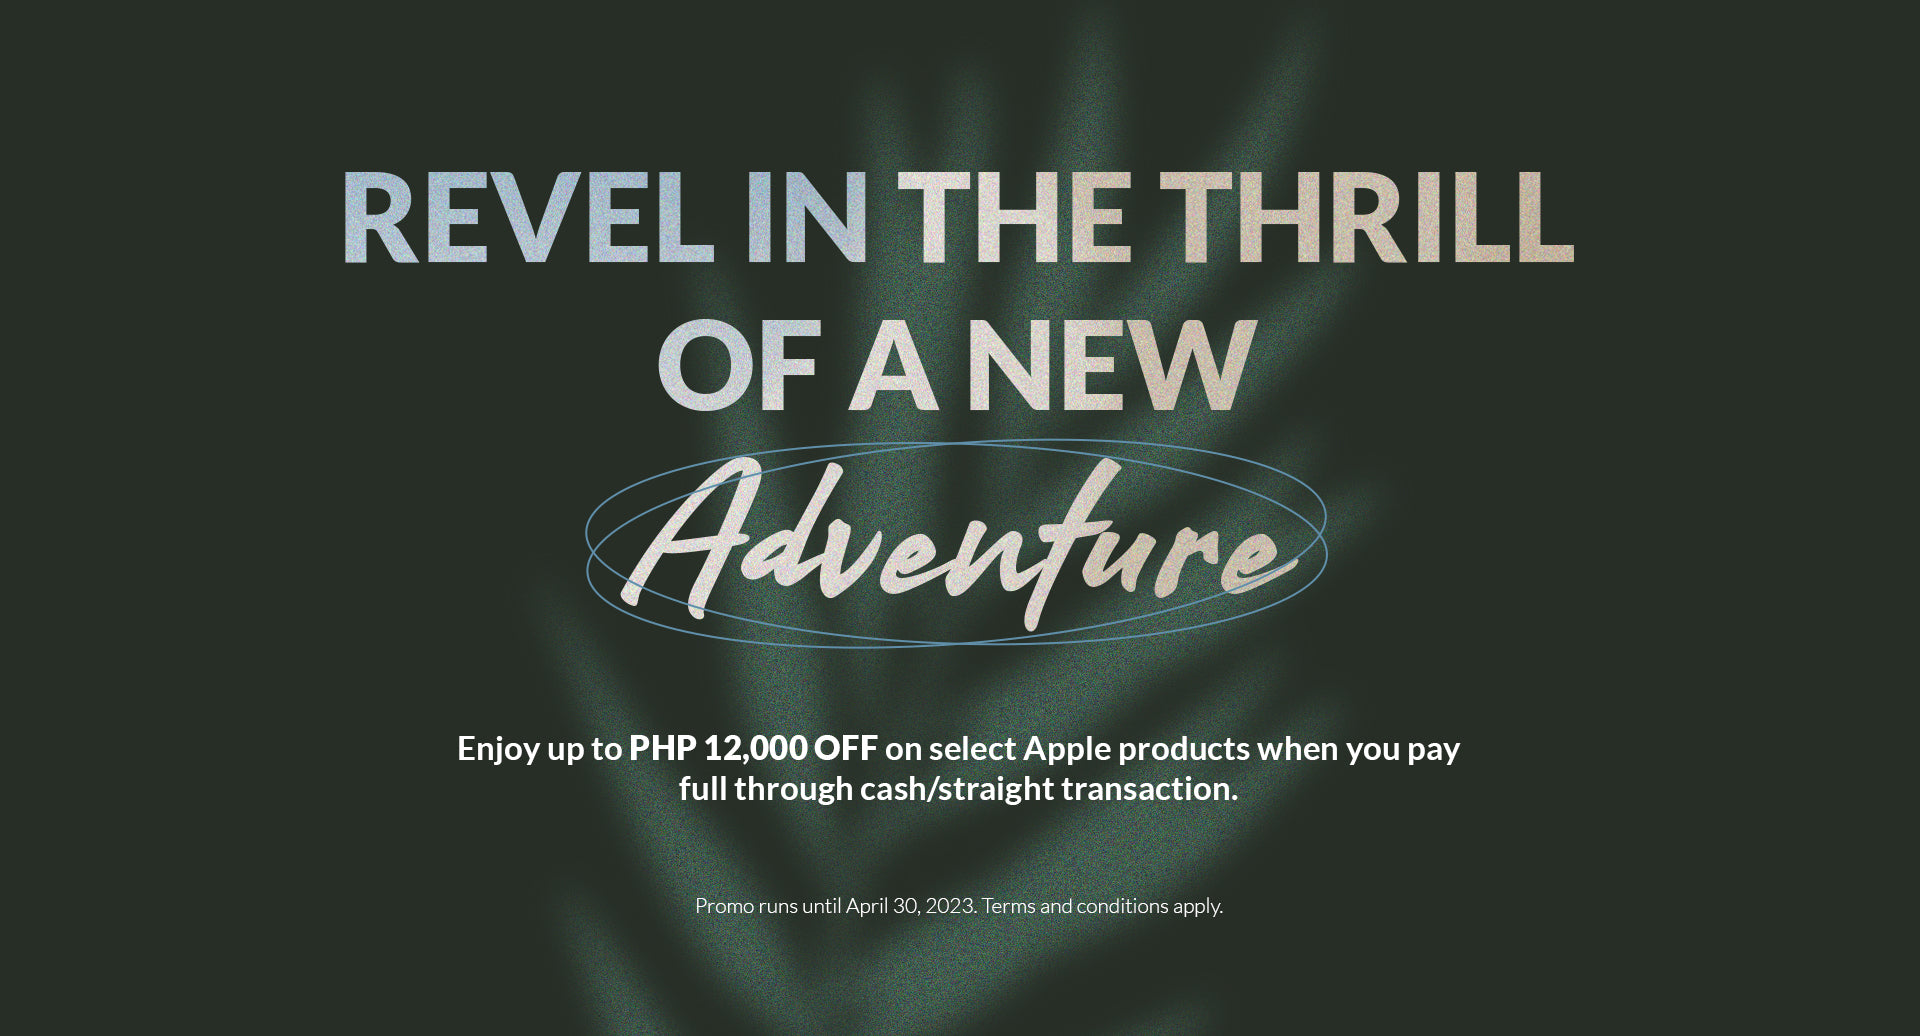 Revel in the thrill of a new adventure! Enjoy ₱12,000 off on select iPhone.